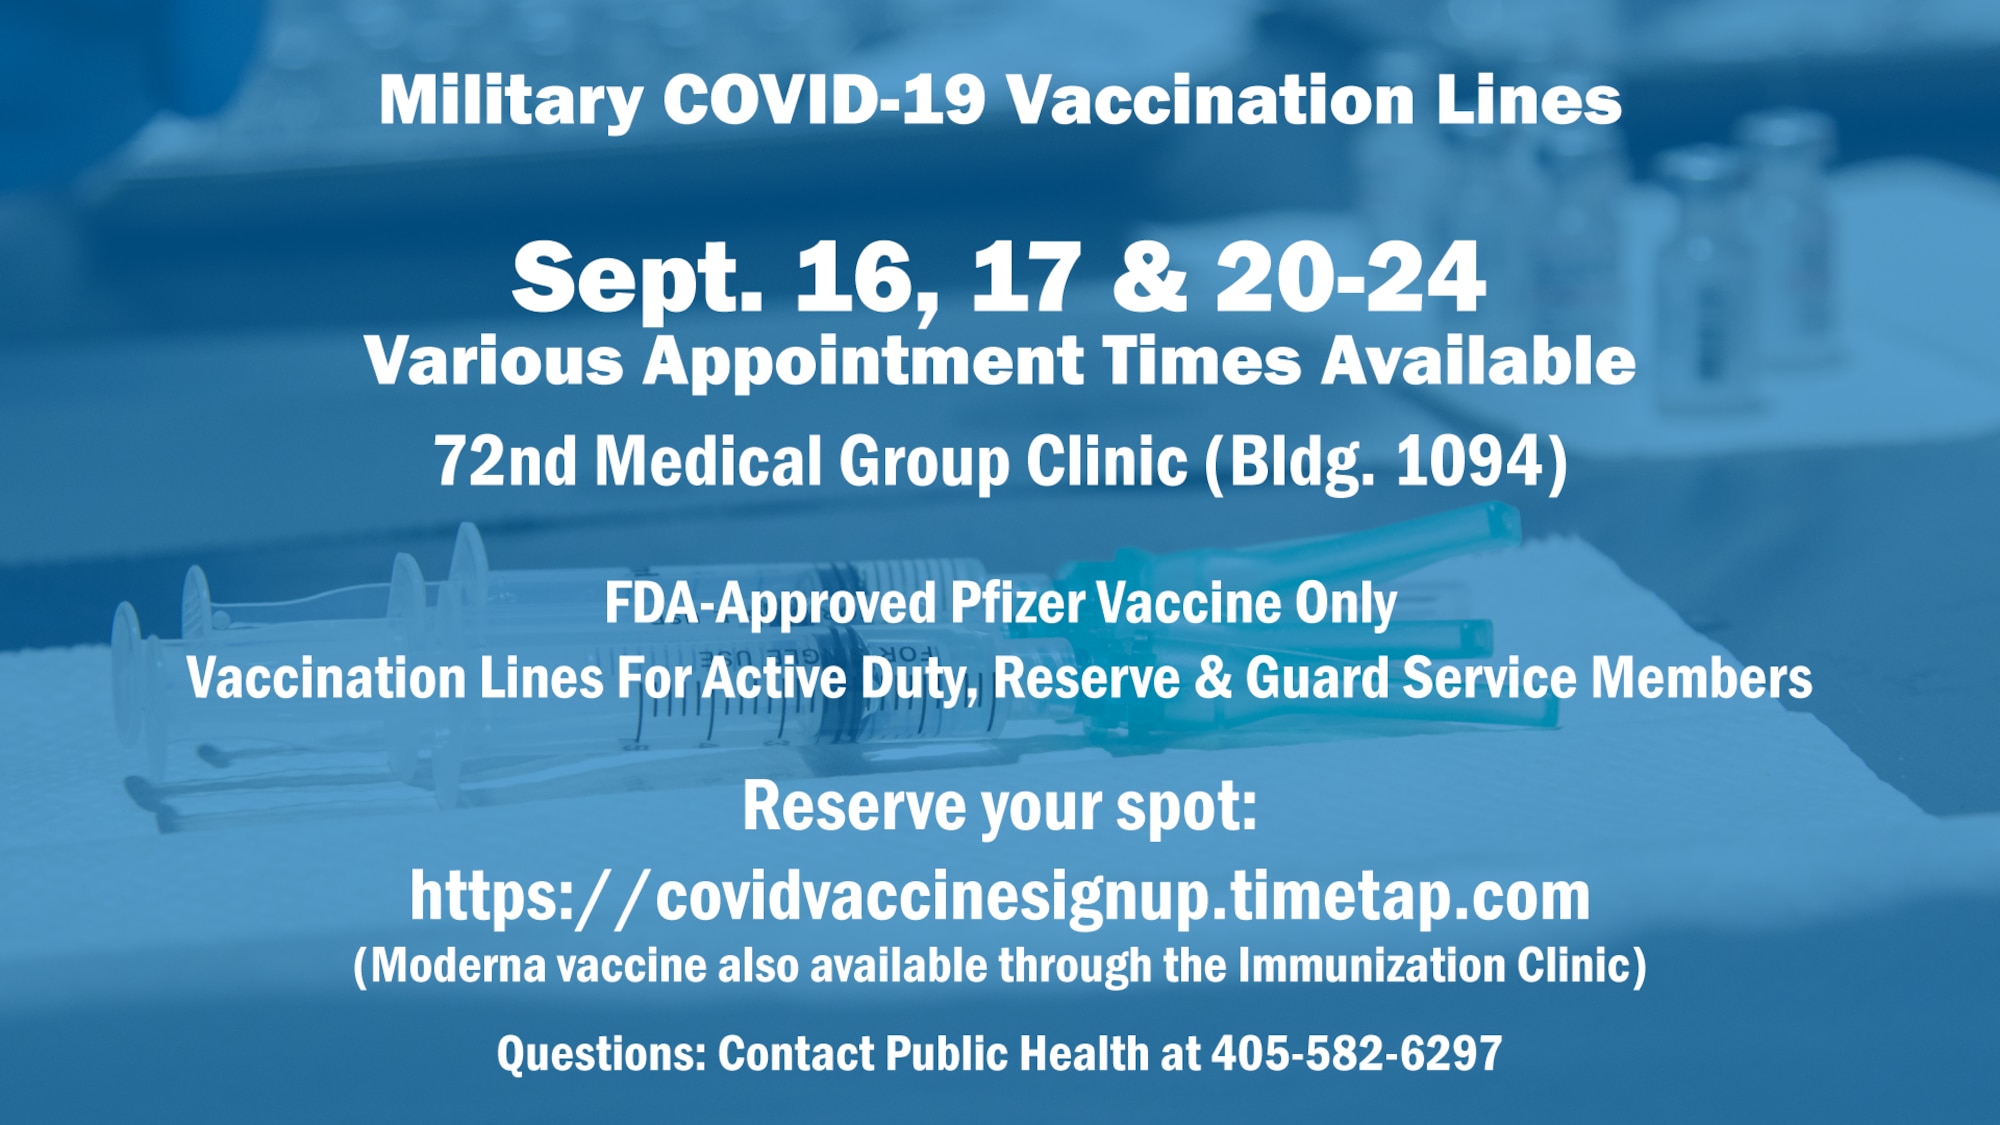 Military COVID-19 Vaccination Lines Flyer